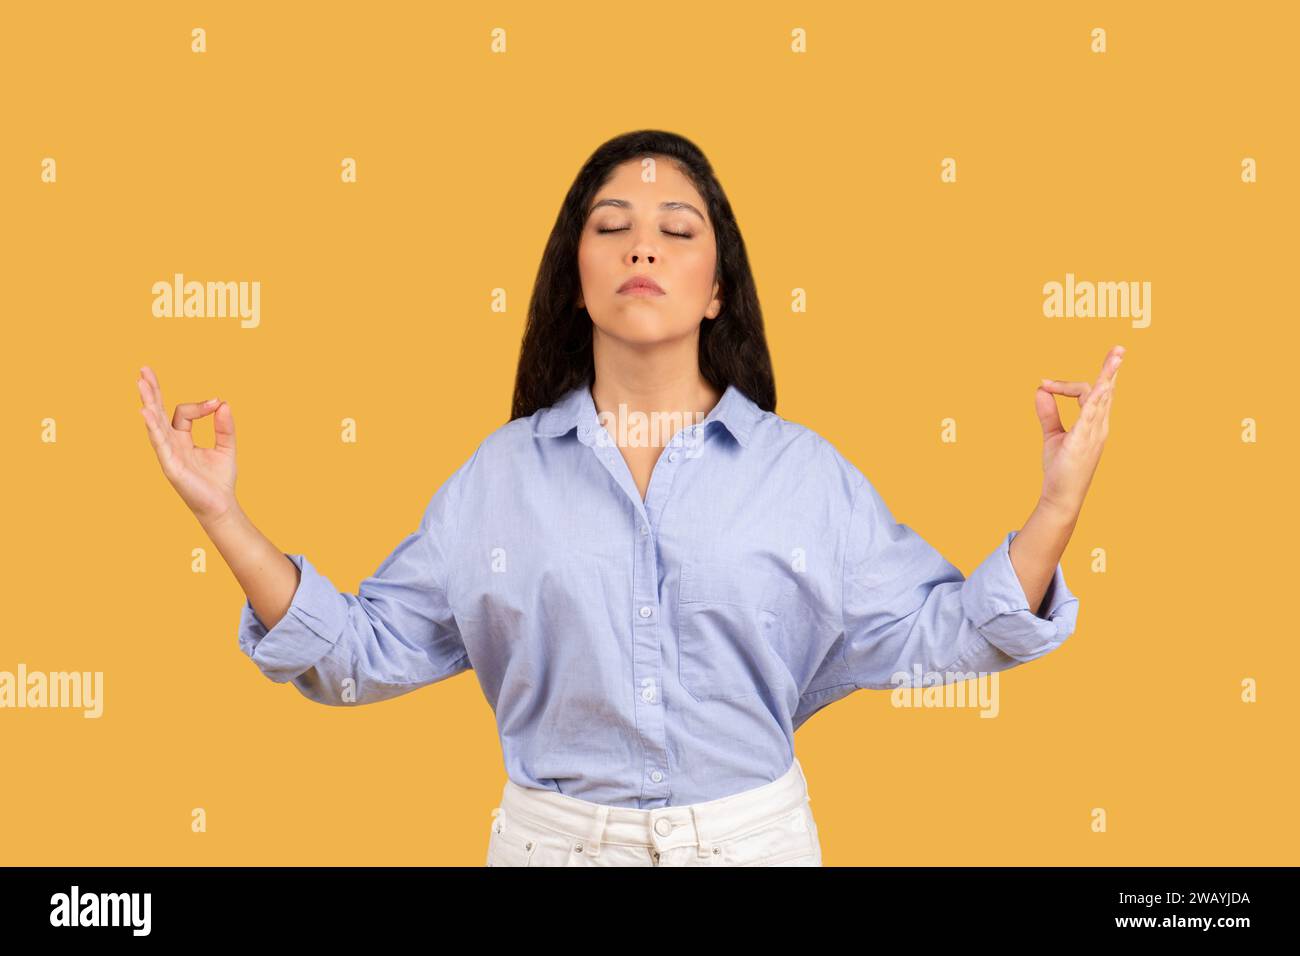 A serene young woman with closed eyes in a light blue shirt practices meditation with raised hands Stock Photo